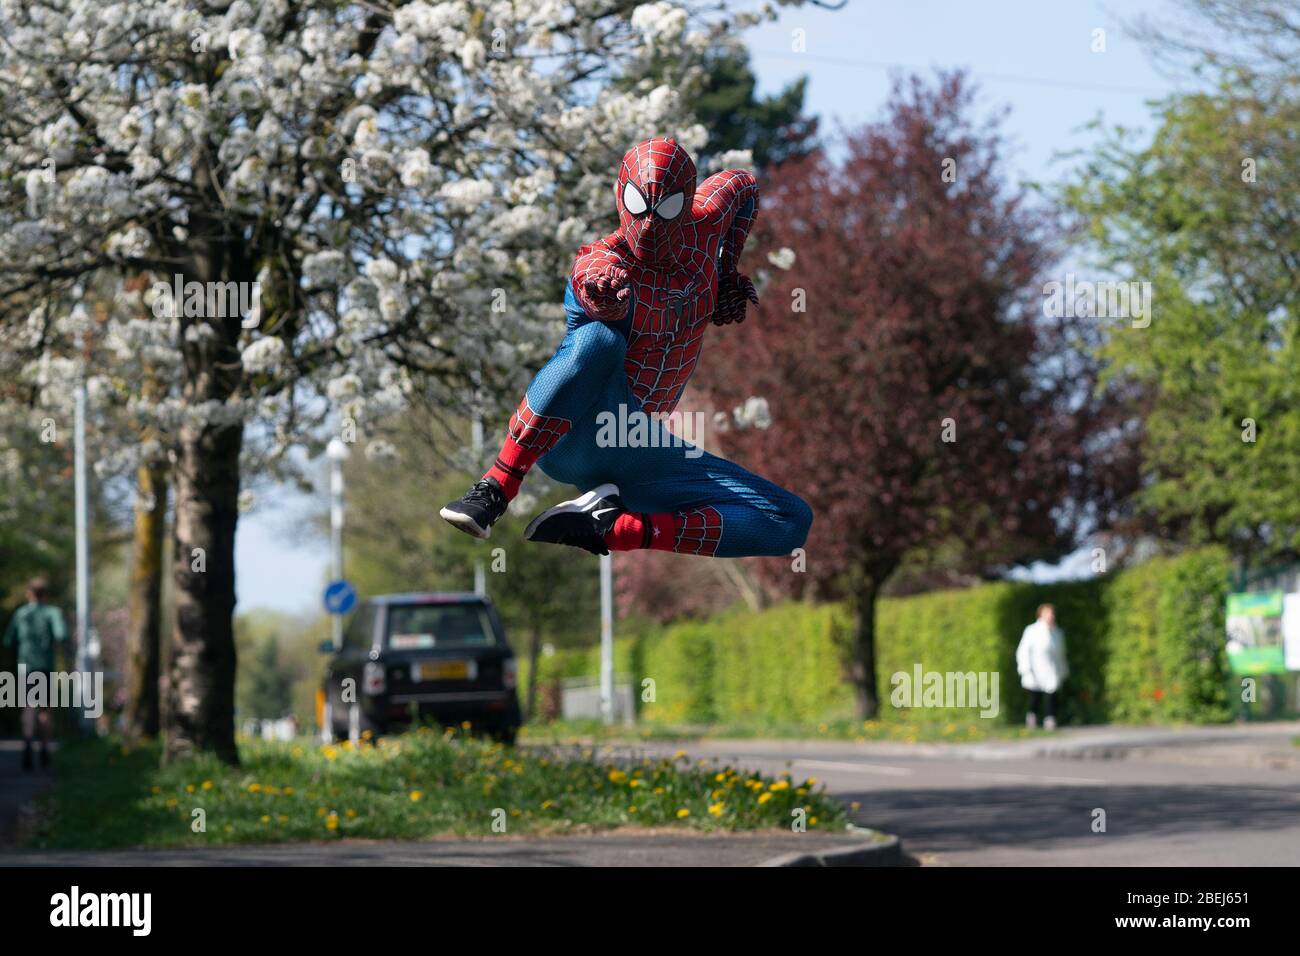 Manchester, COVID-19 outbreak in Manchester. 13th Apr, 2020. Jason Baird, who runs a martial arts academy in South Manchester, dressed up as Spider-Man, entertains the public amid the COVID-19 outbreak in Manchester, Britain on April 13, 2020. Credit: Jon Super/Xinhua/Alamy Live News Stock Photo